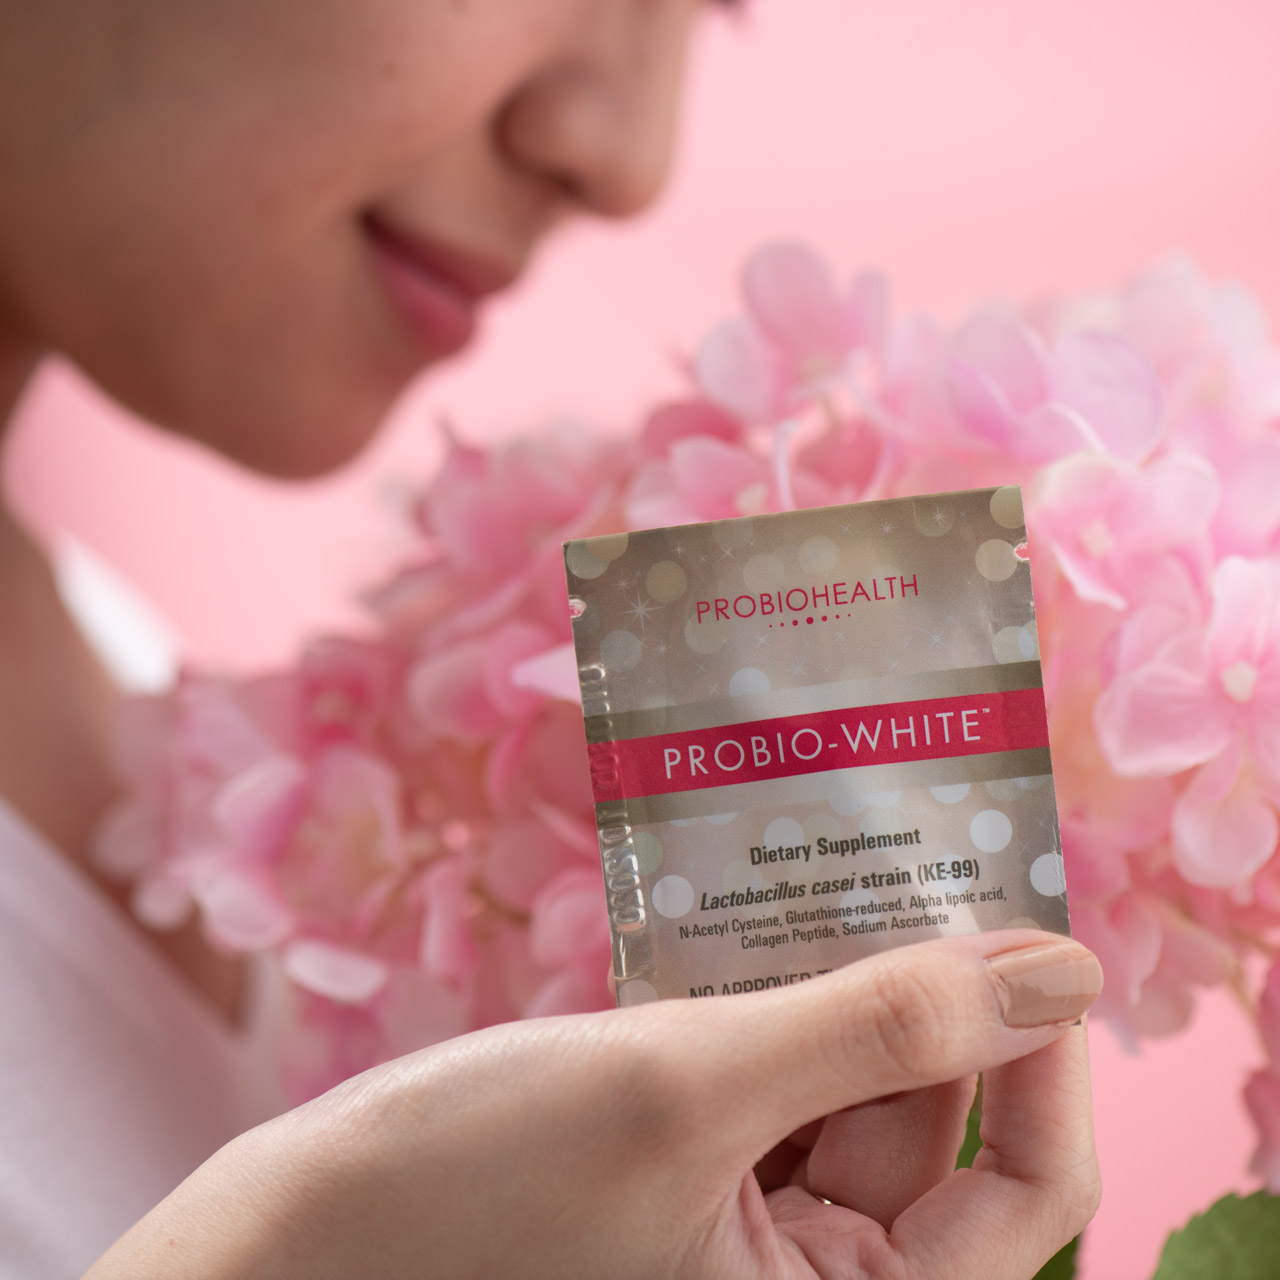 A model holding a packet of Probio-White, with pink background.